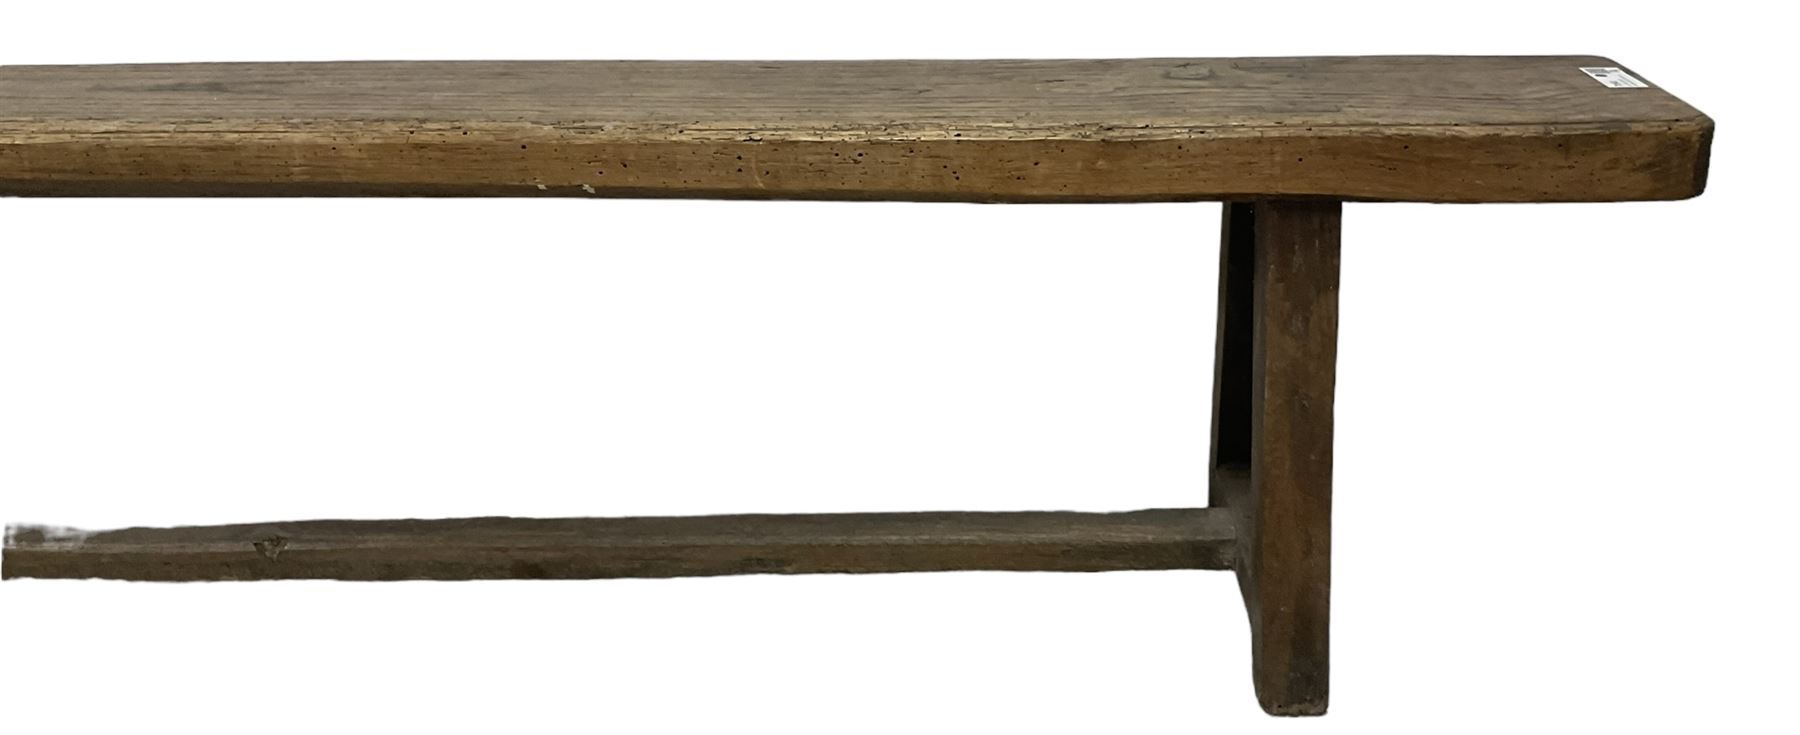 Large 19th century oak bench or pew - Image 4 of 7